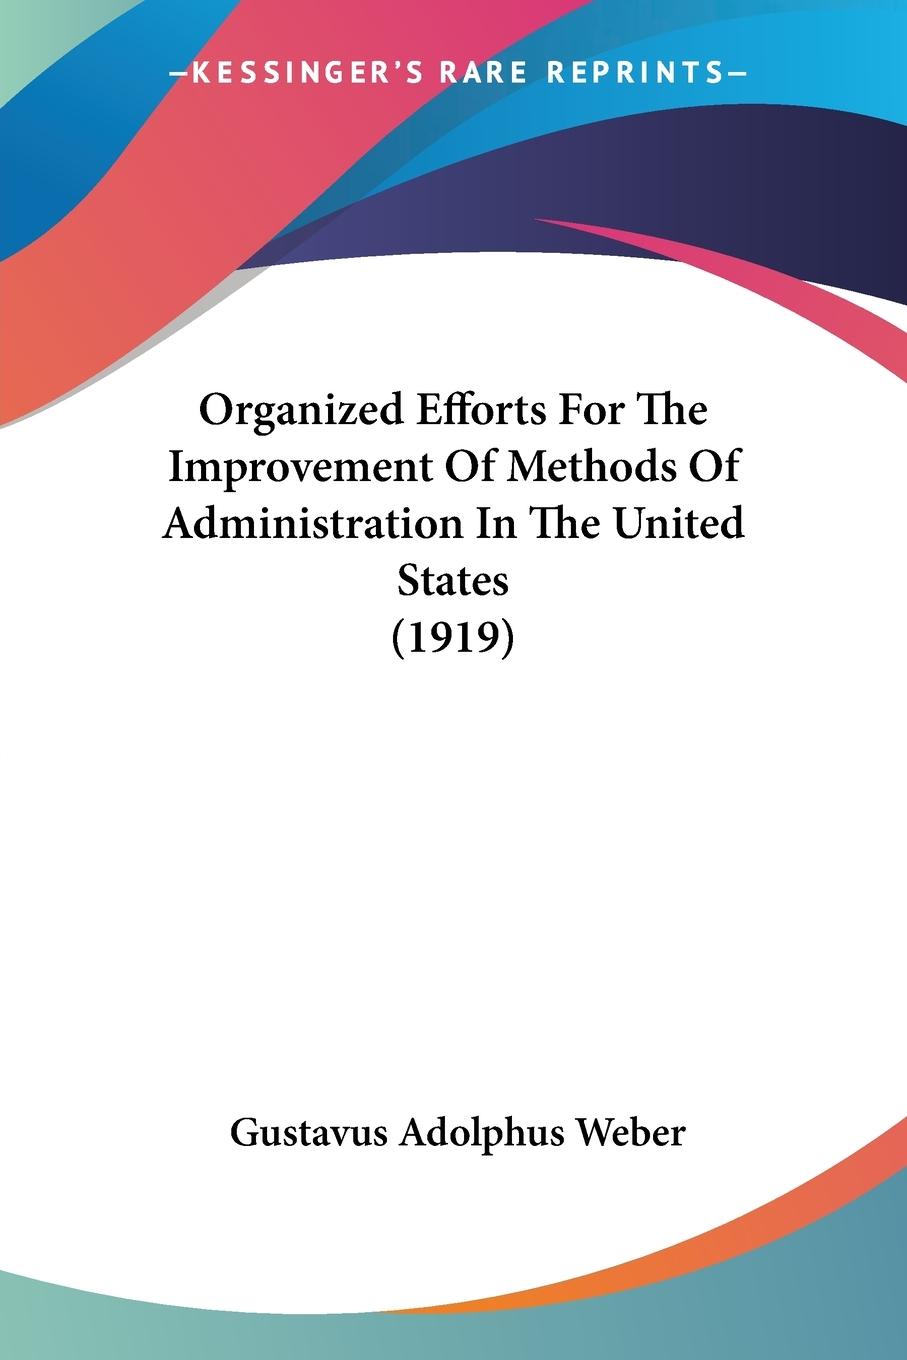 Organized Efforts For The Improvement Of Methods Of Administration In The United States (1919) - Weber, Gustavus Adolphus